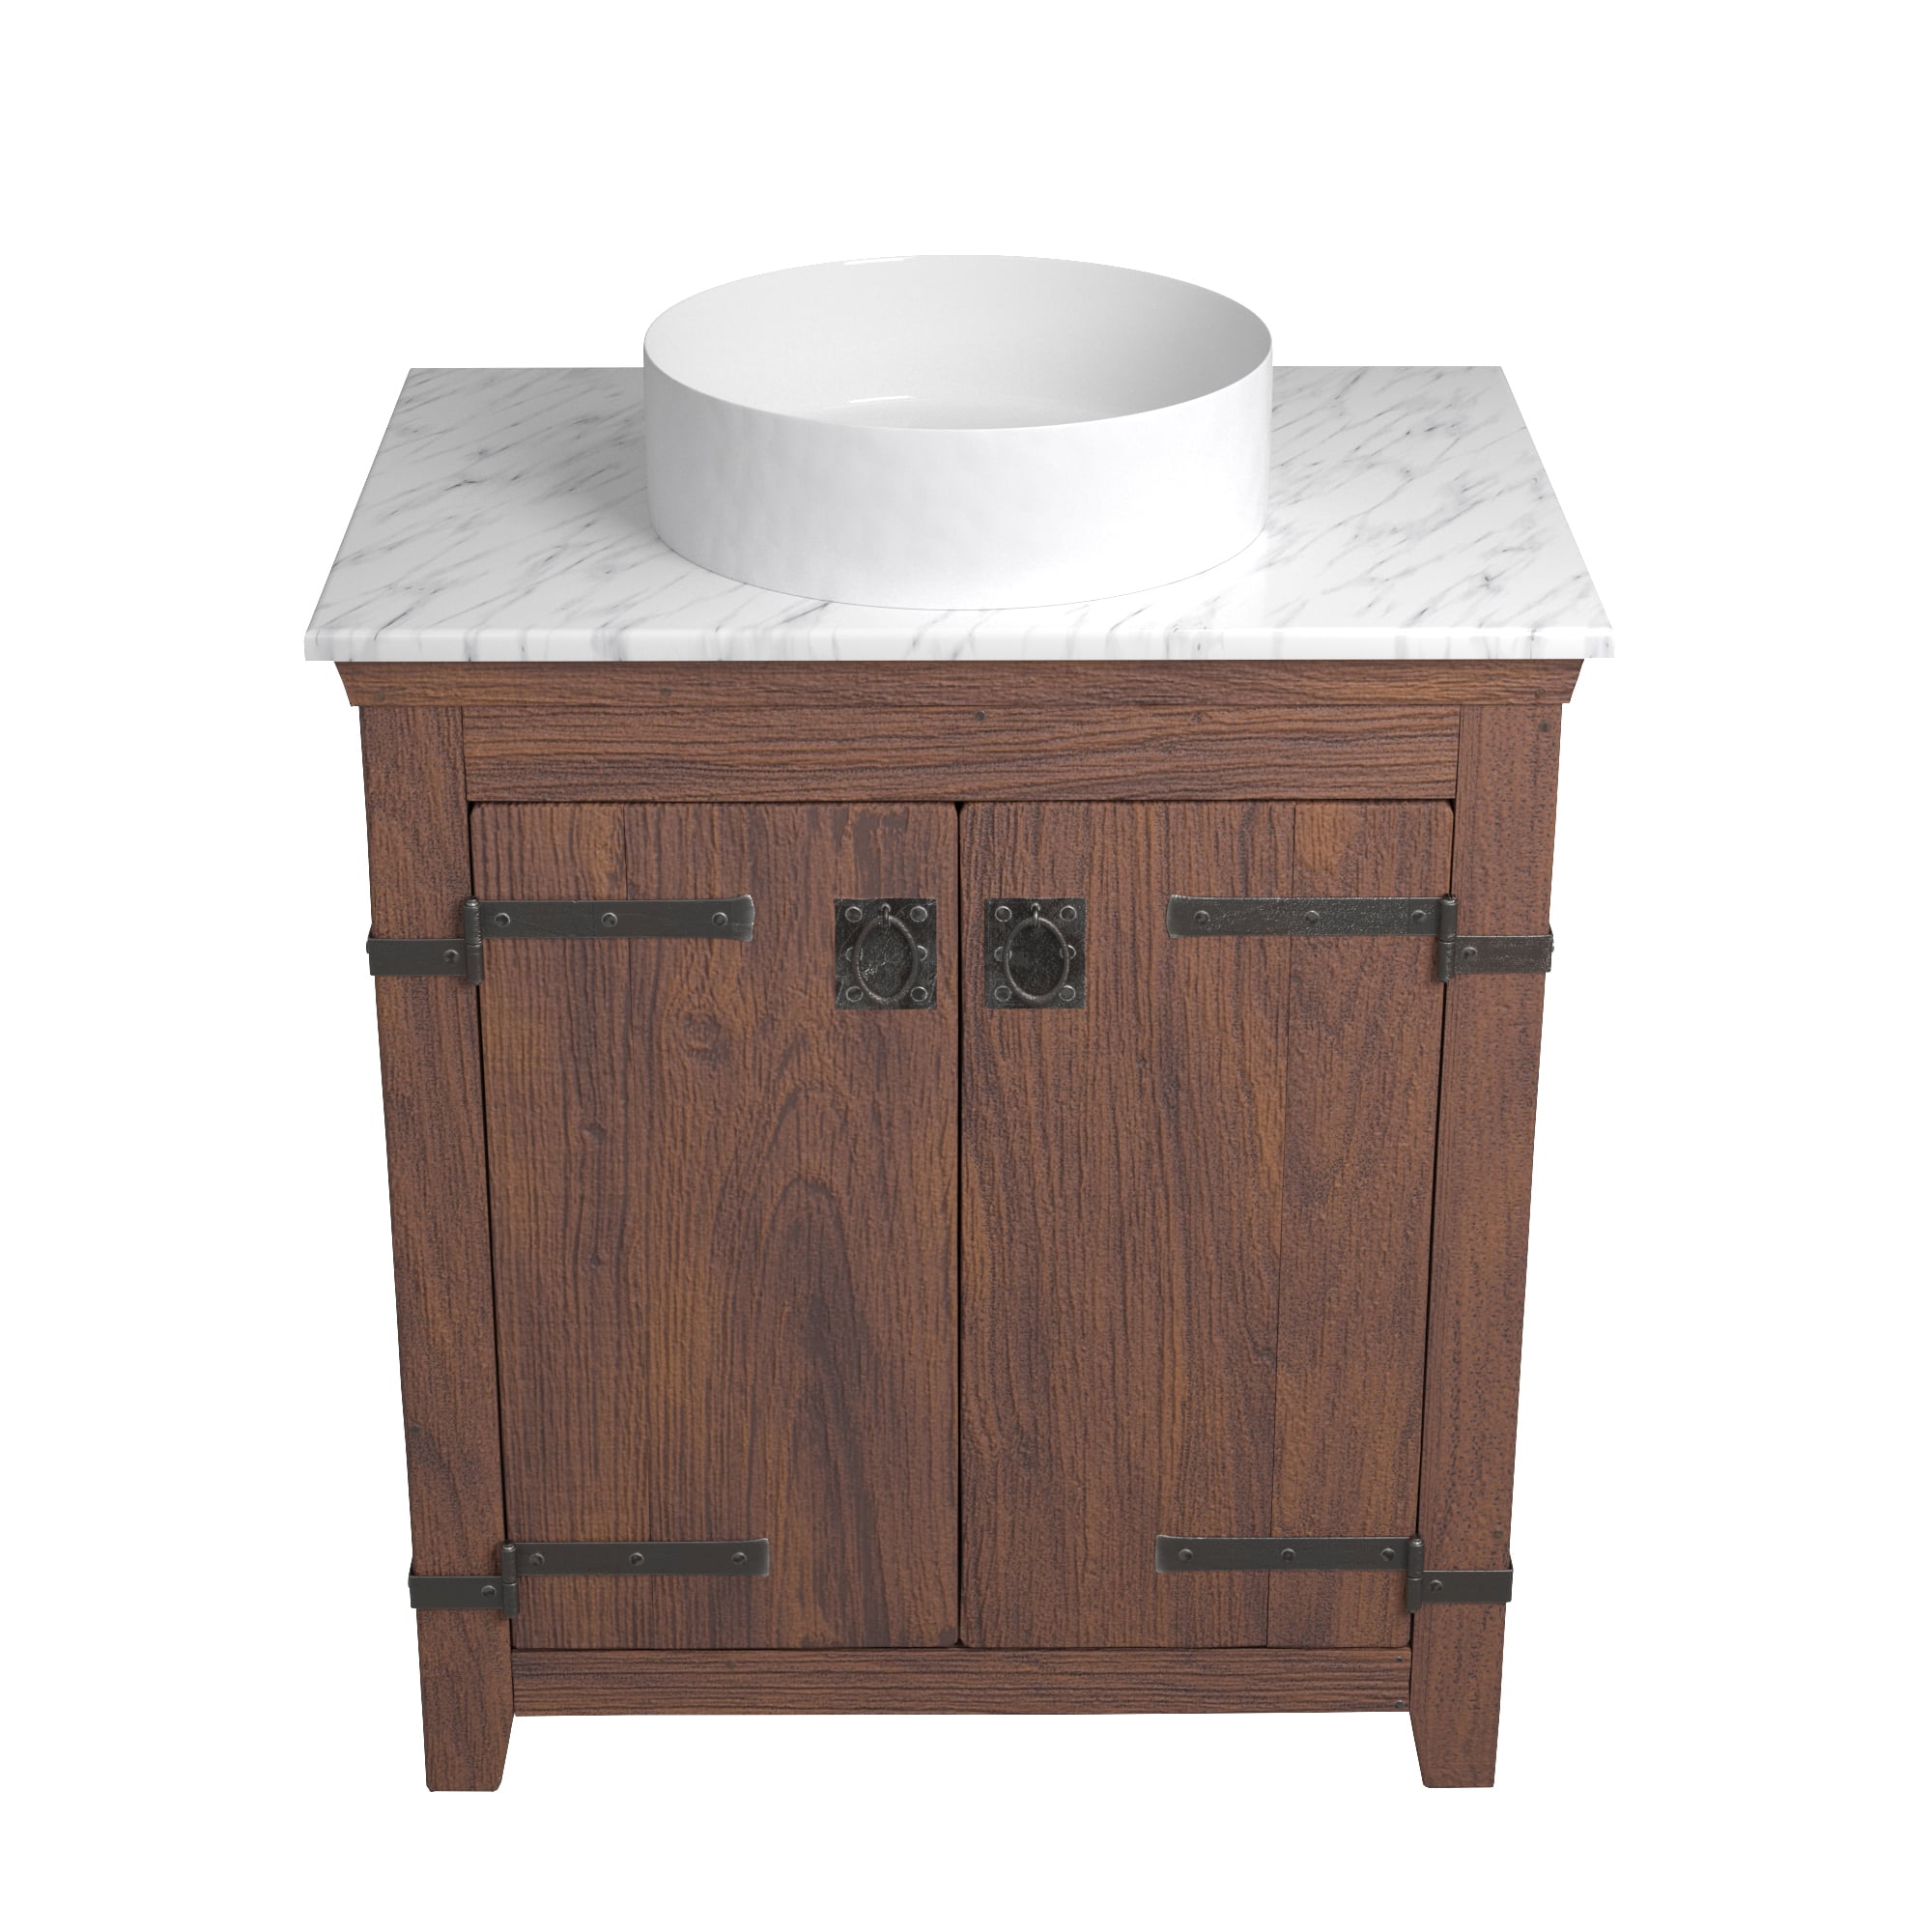 Native Trails 30" Americana Vanity in Chestnut with Carrara Marble Top and Positano in Bianco, No Faucet Hole, BND30-VB-CT-MG-052